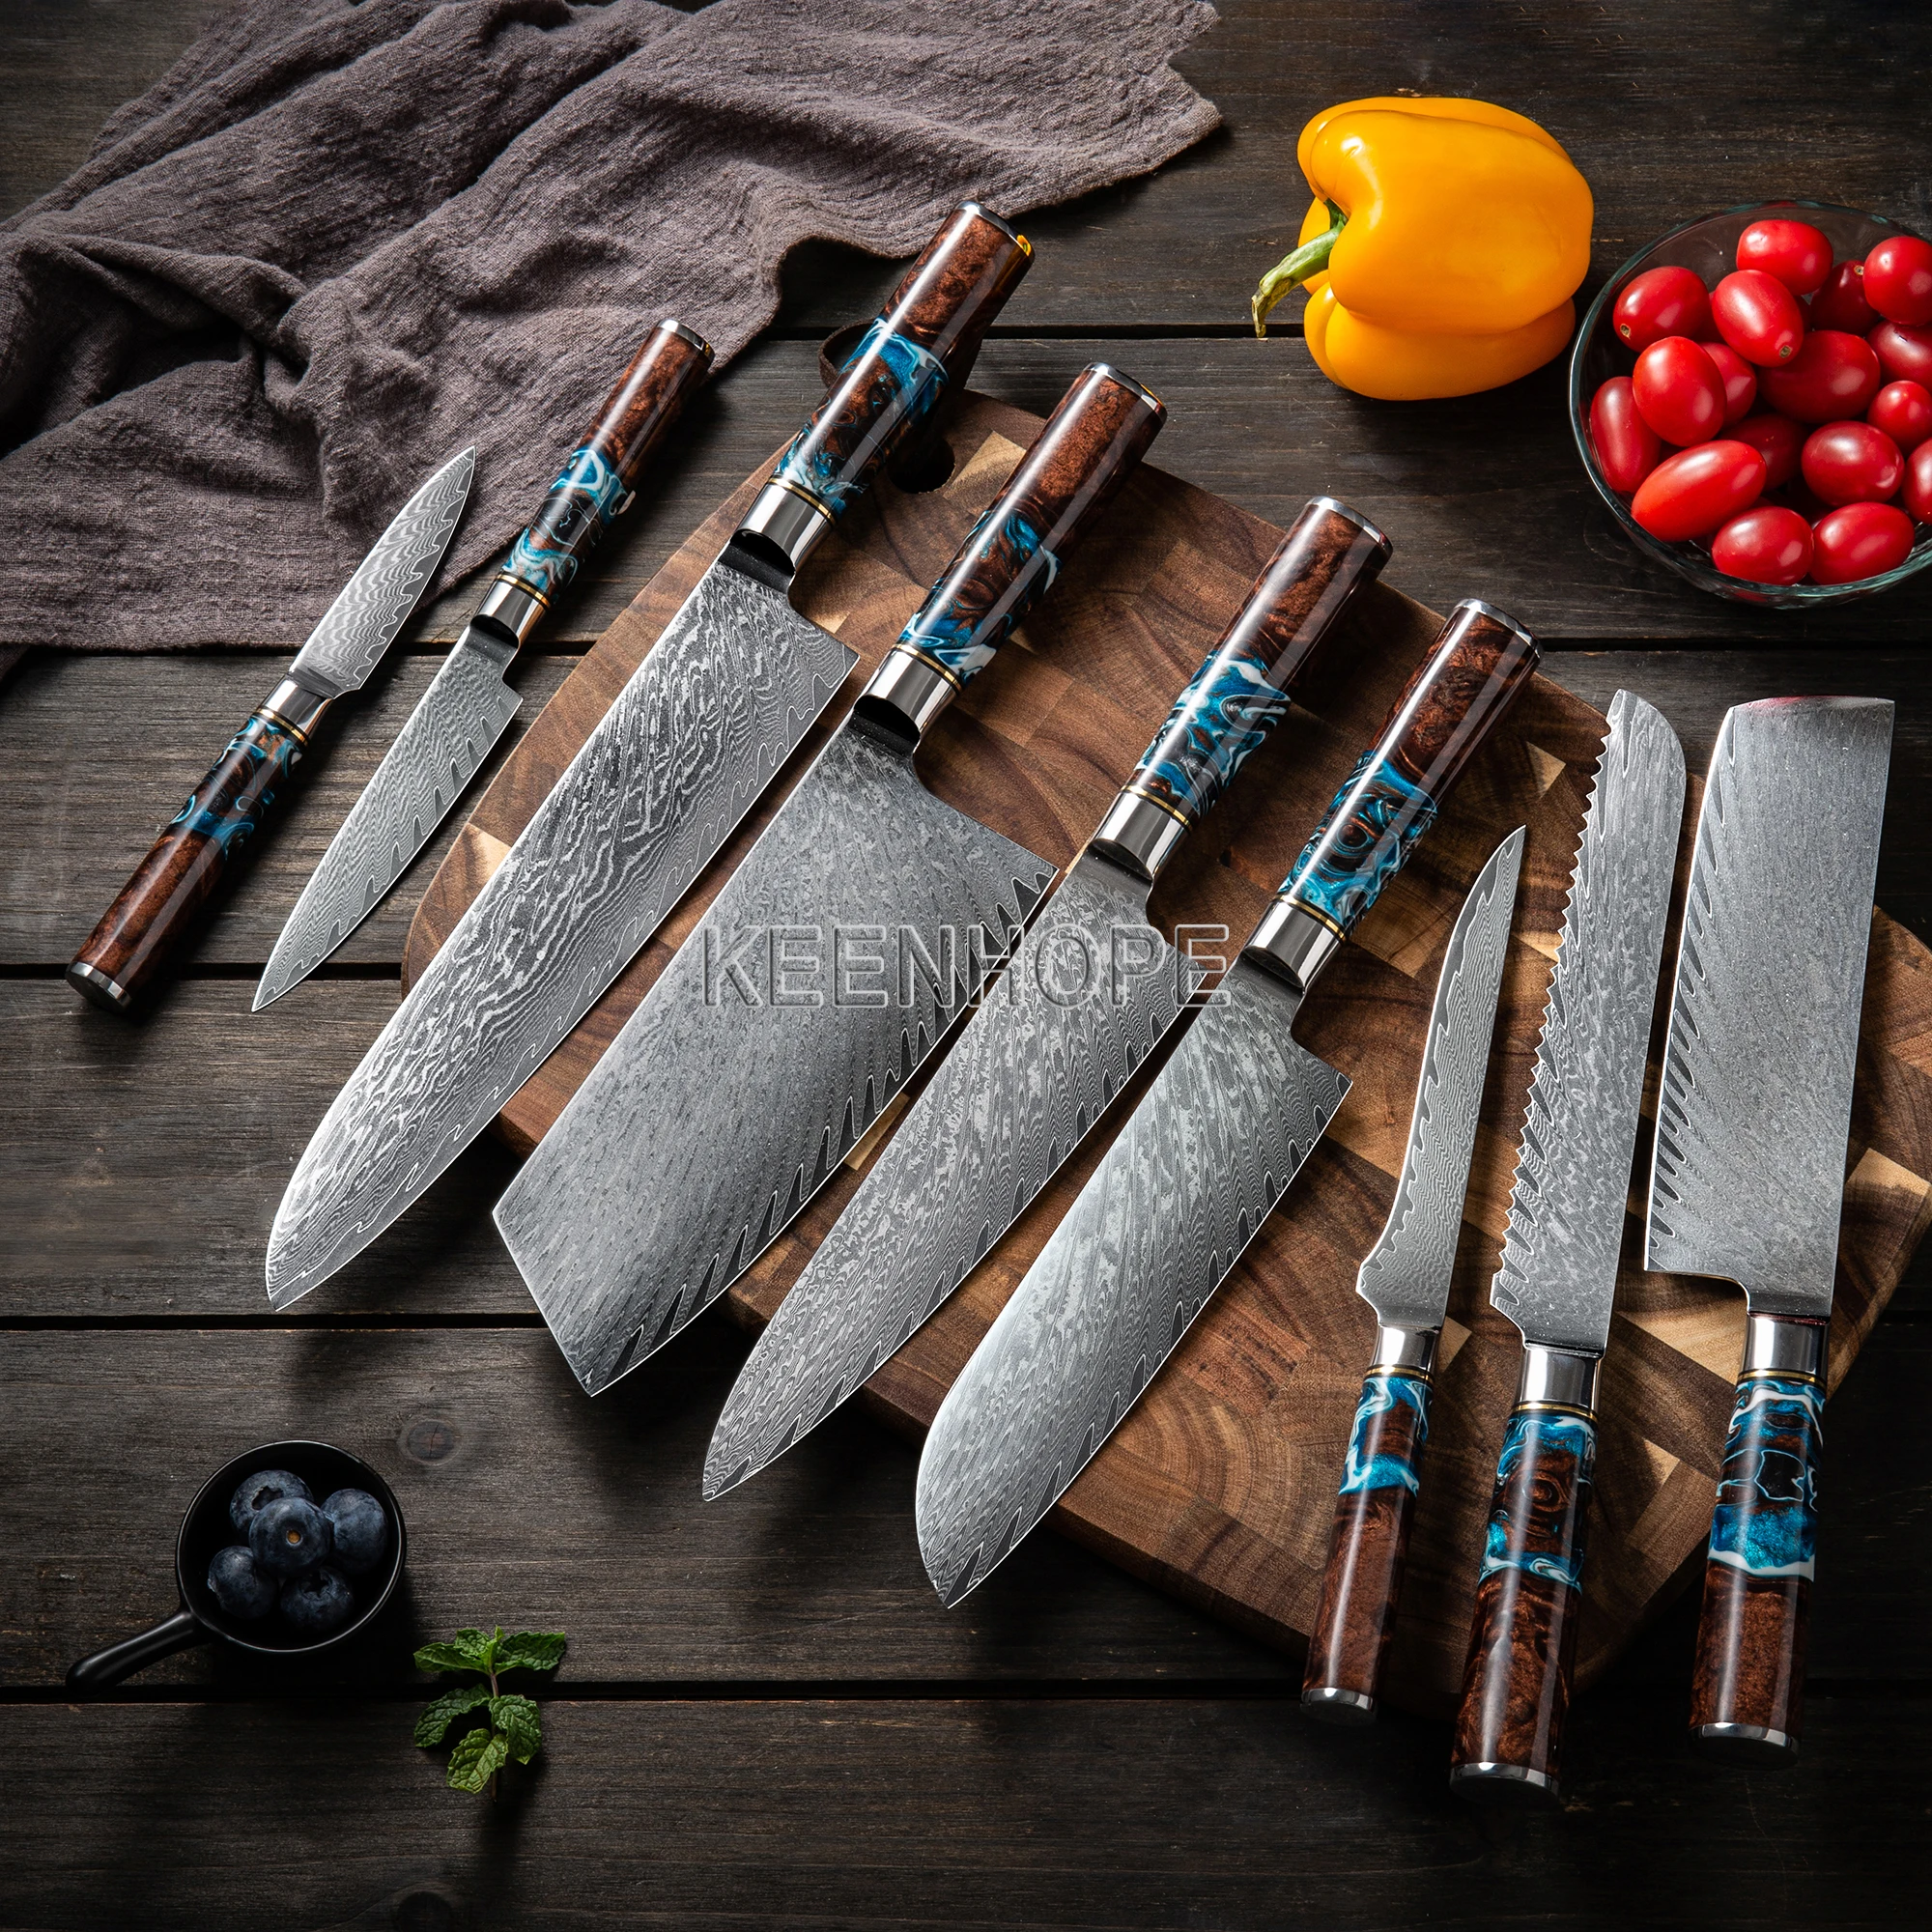 

Kitchen Knives Set with Composited Resin And Maple Burl Wood Handle 9 pcs 67 Layers Damascus VG10 Knife Set